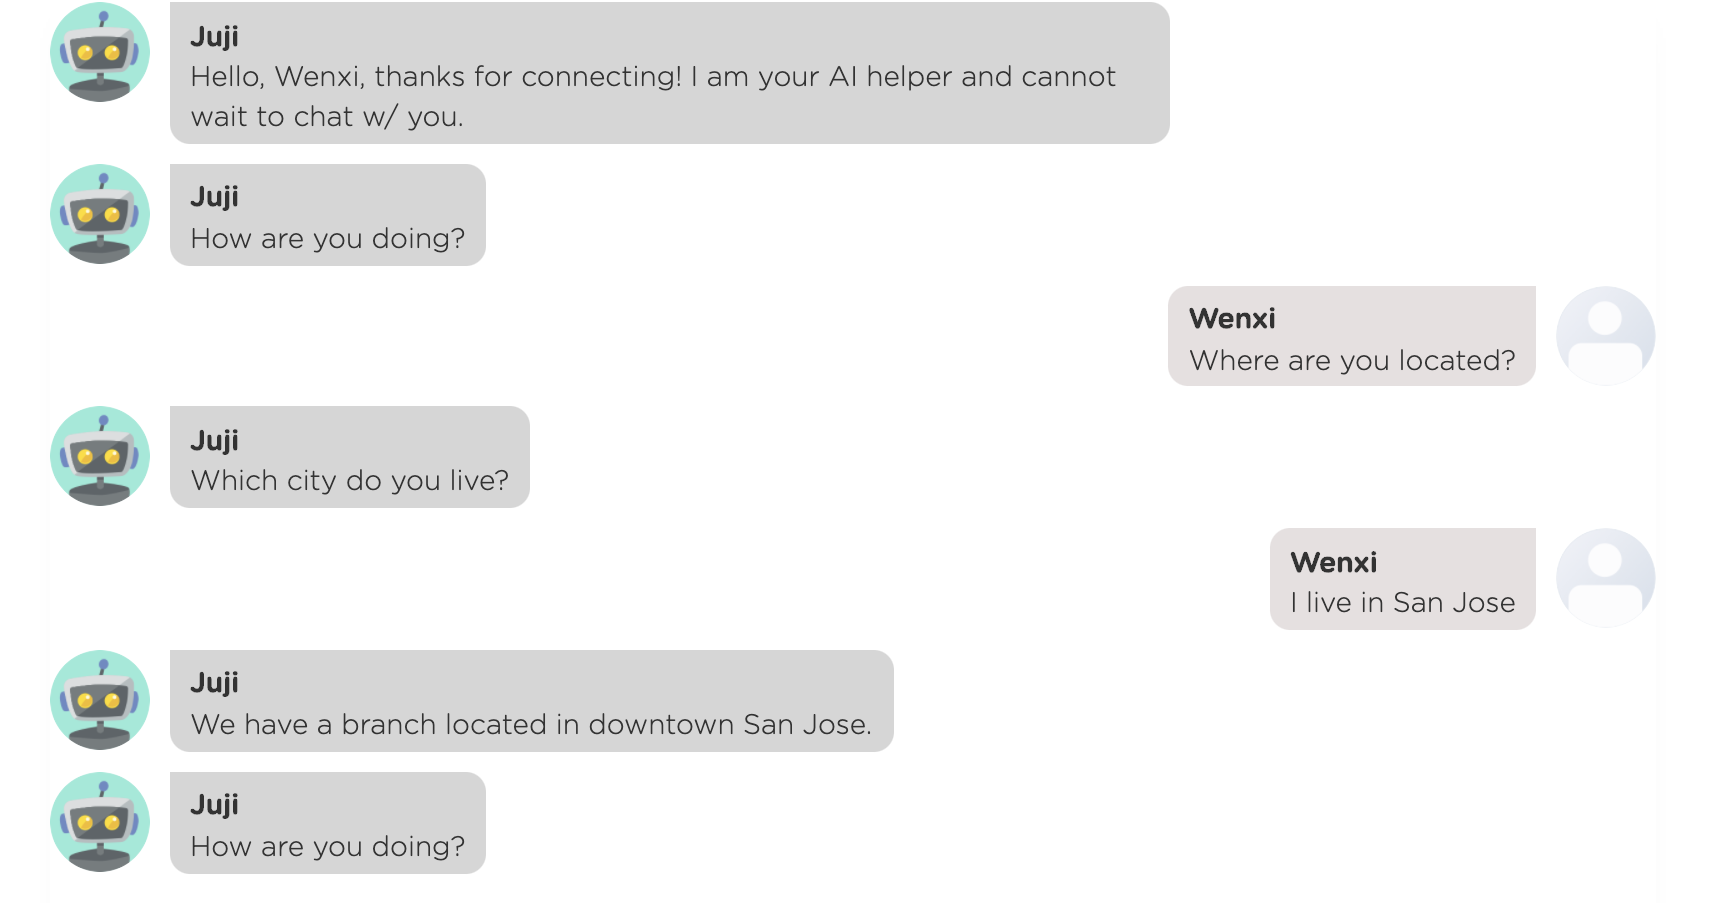 The chatbot first checks the user's location, then provides the nearest branch's location